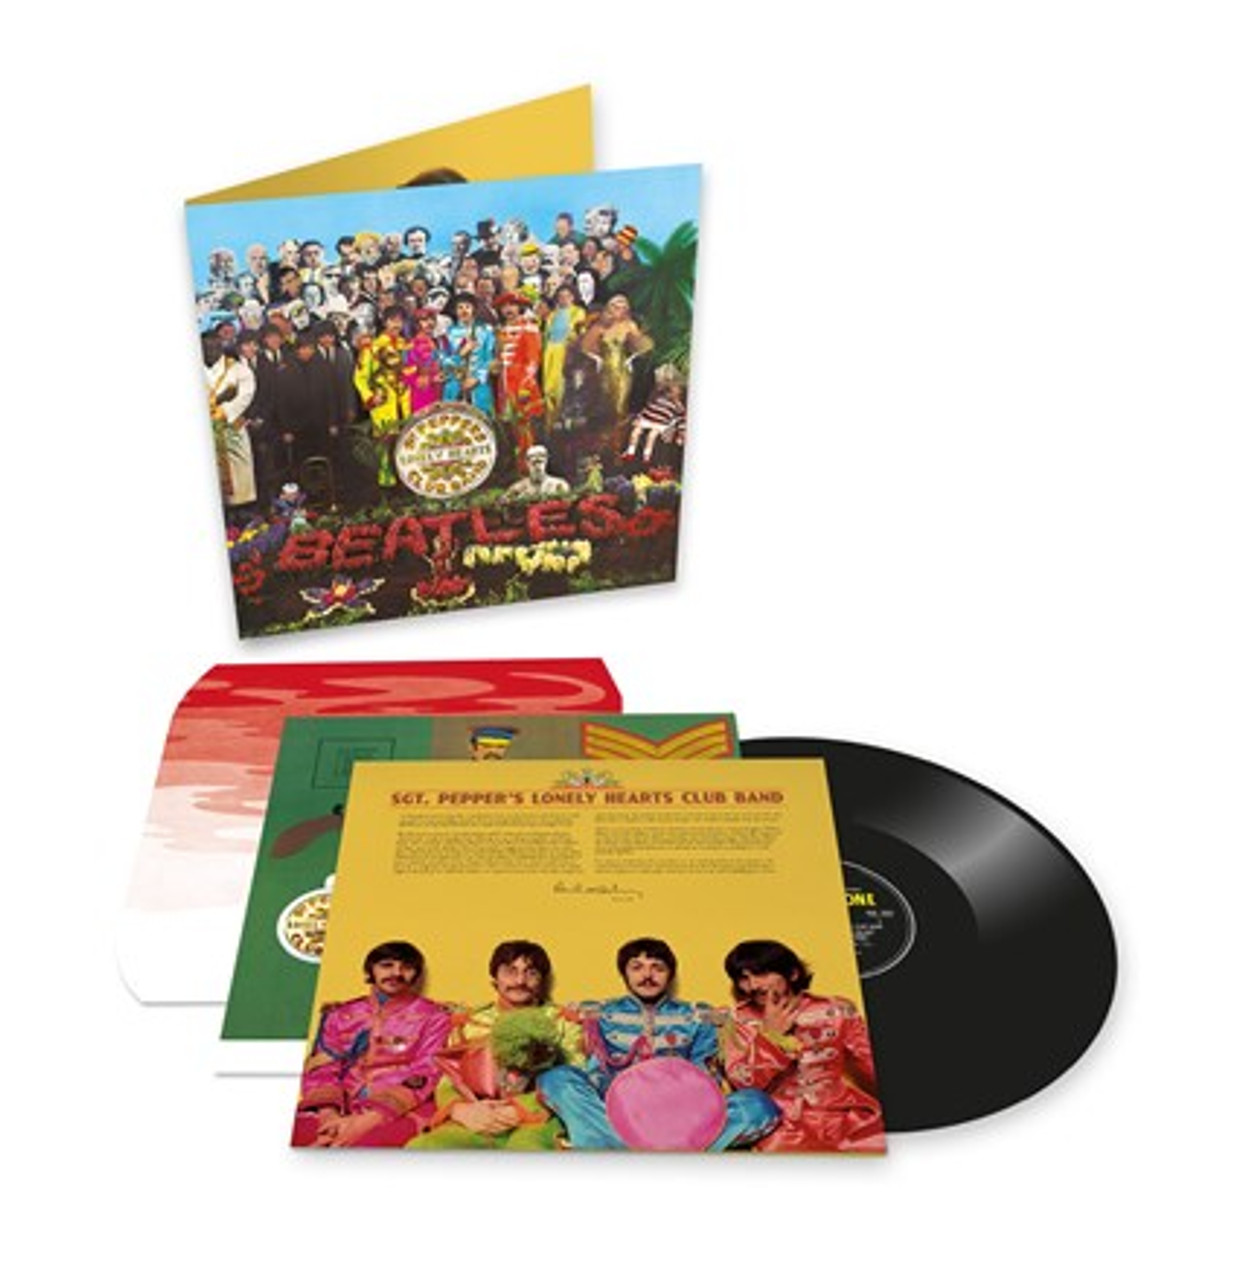 The Beatles - Sgt. Pepper's Lonely Hearts Club Band (180g Vinyl LP)